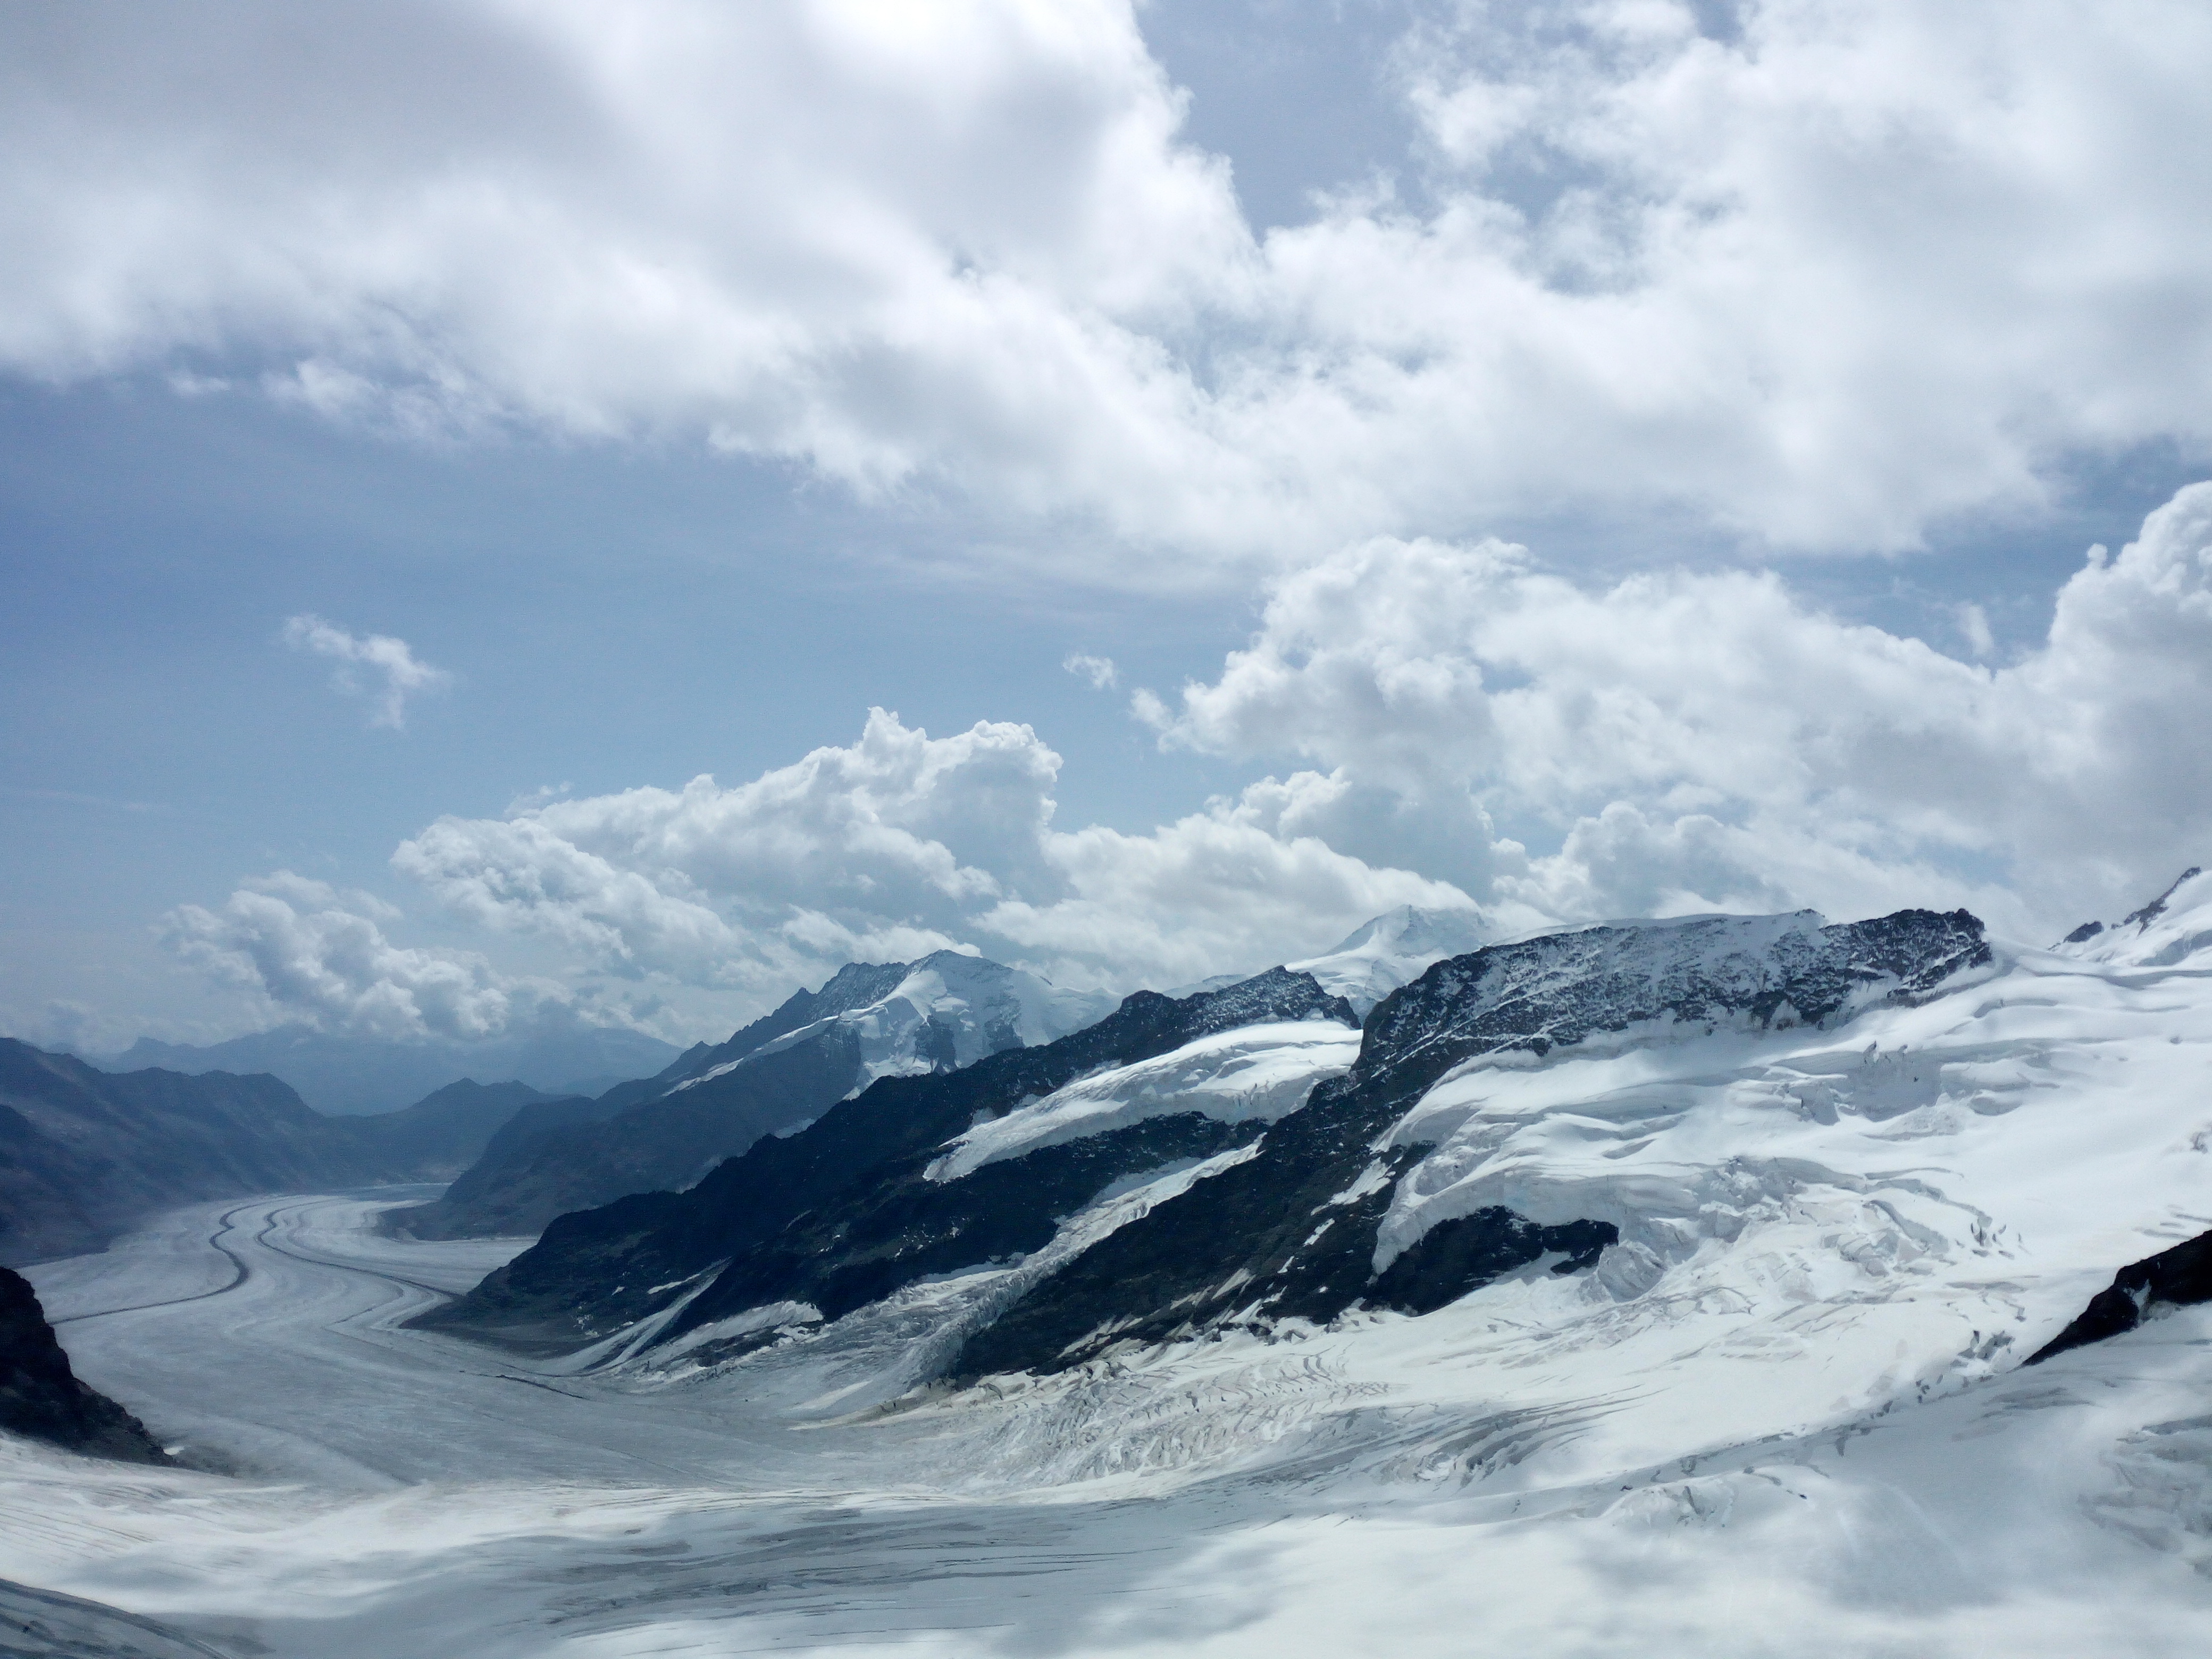 Winner of the Student and Early Career Scientists Conference Photography Competition – Interlaken by Beatriz Fernández-Duque. Image shows snowy mountains and cloudy skies